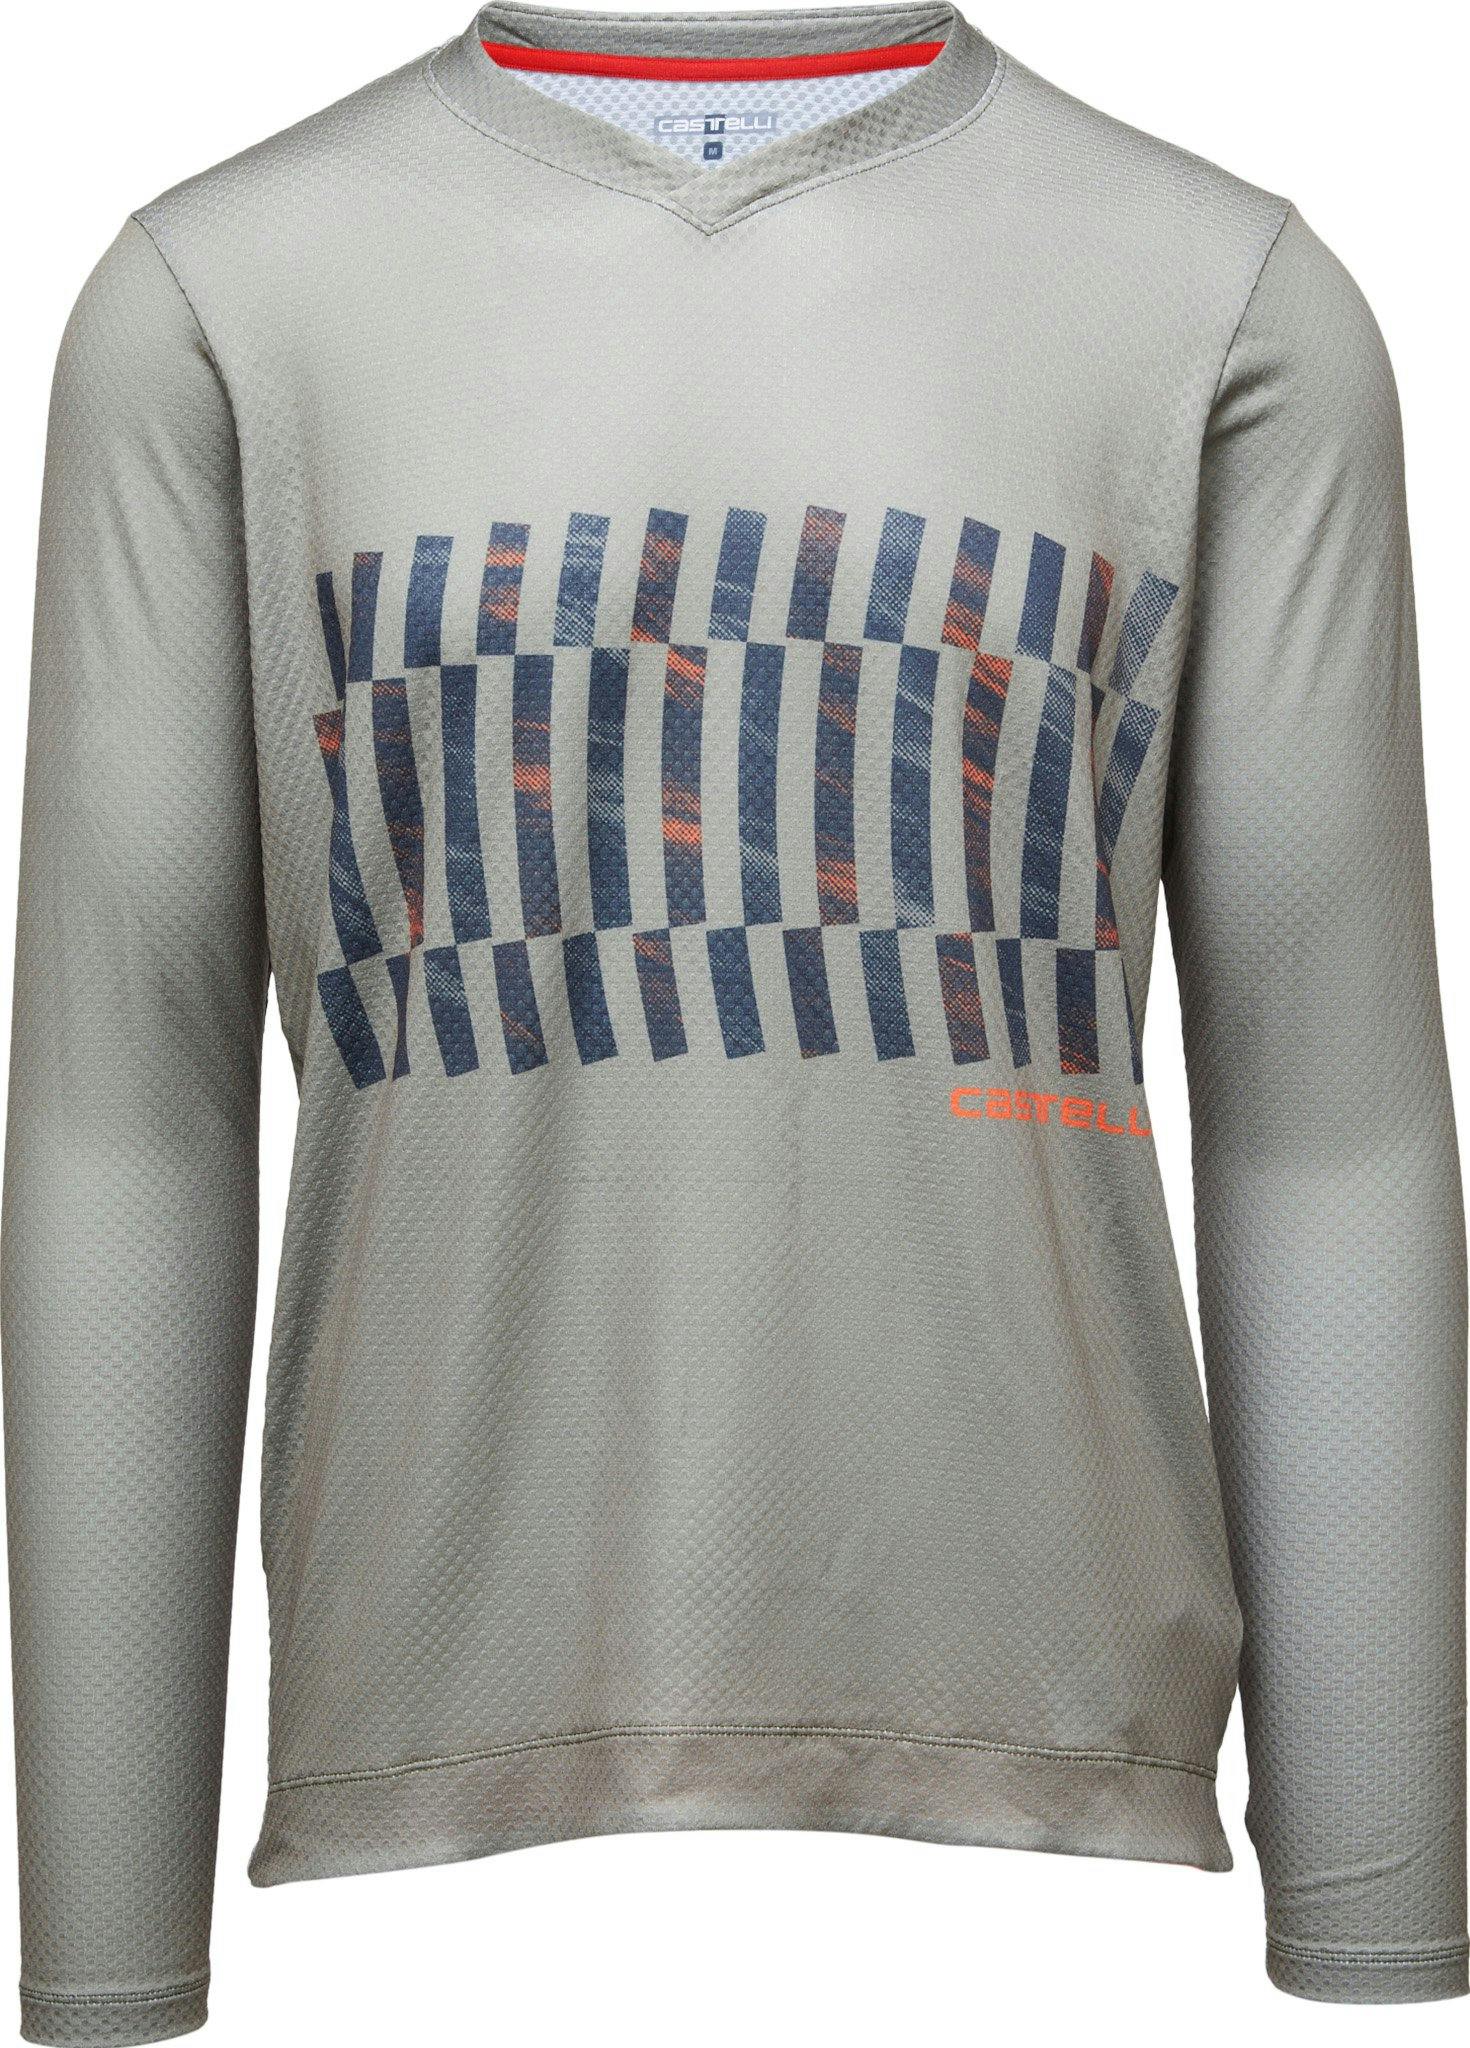 Product image for Trail Tech Longsleeve Tee - Men's